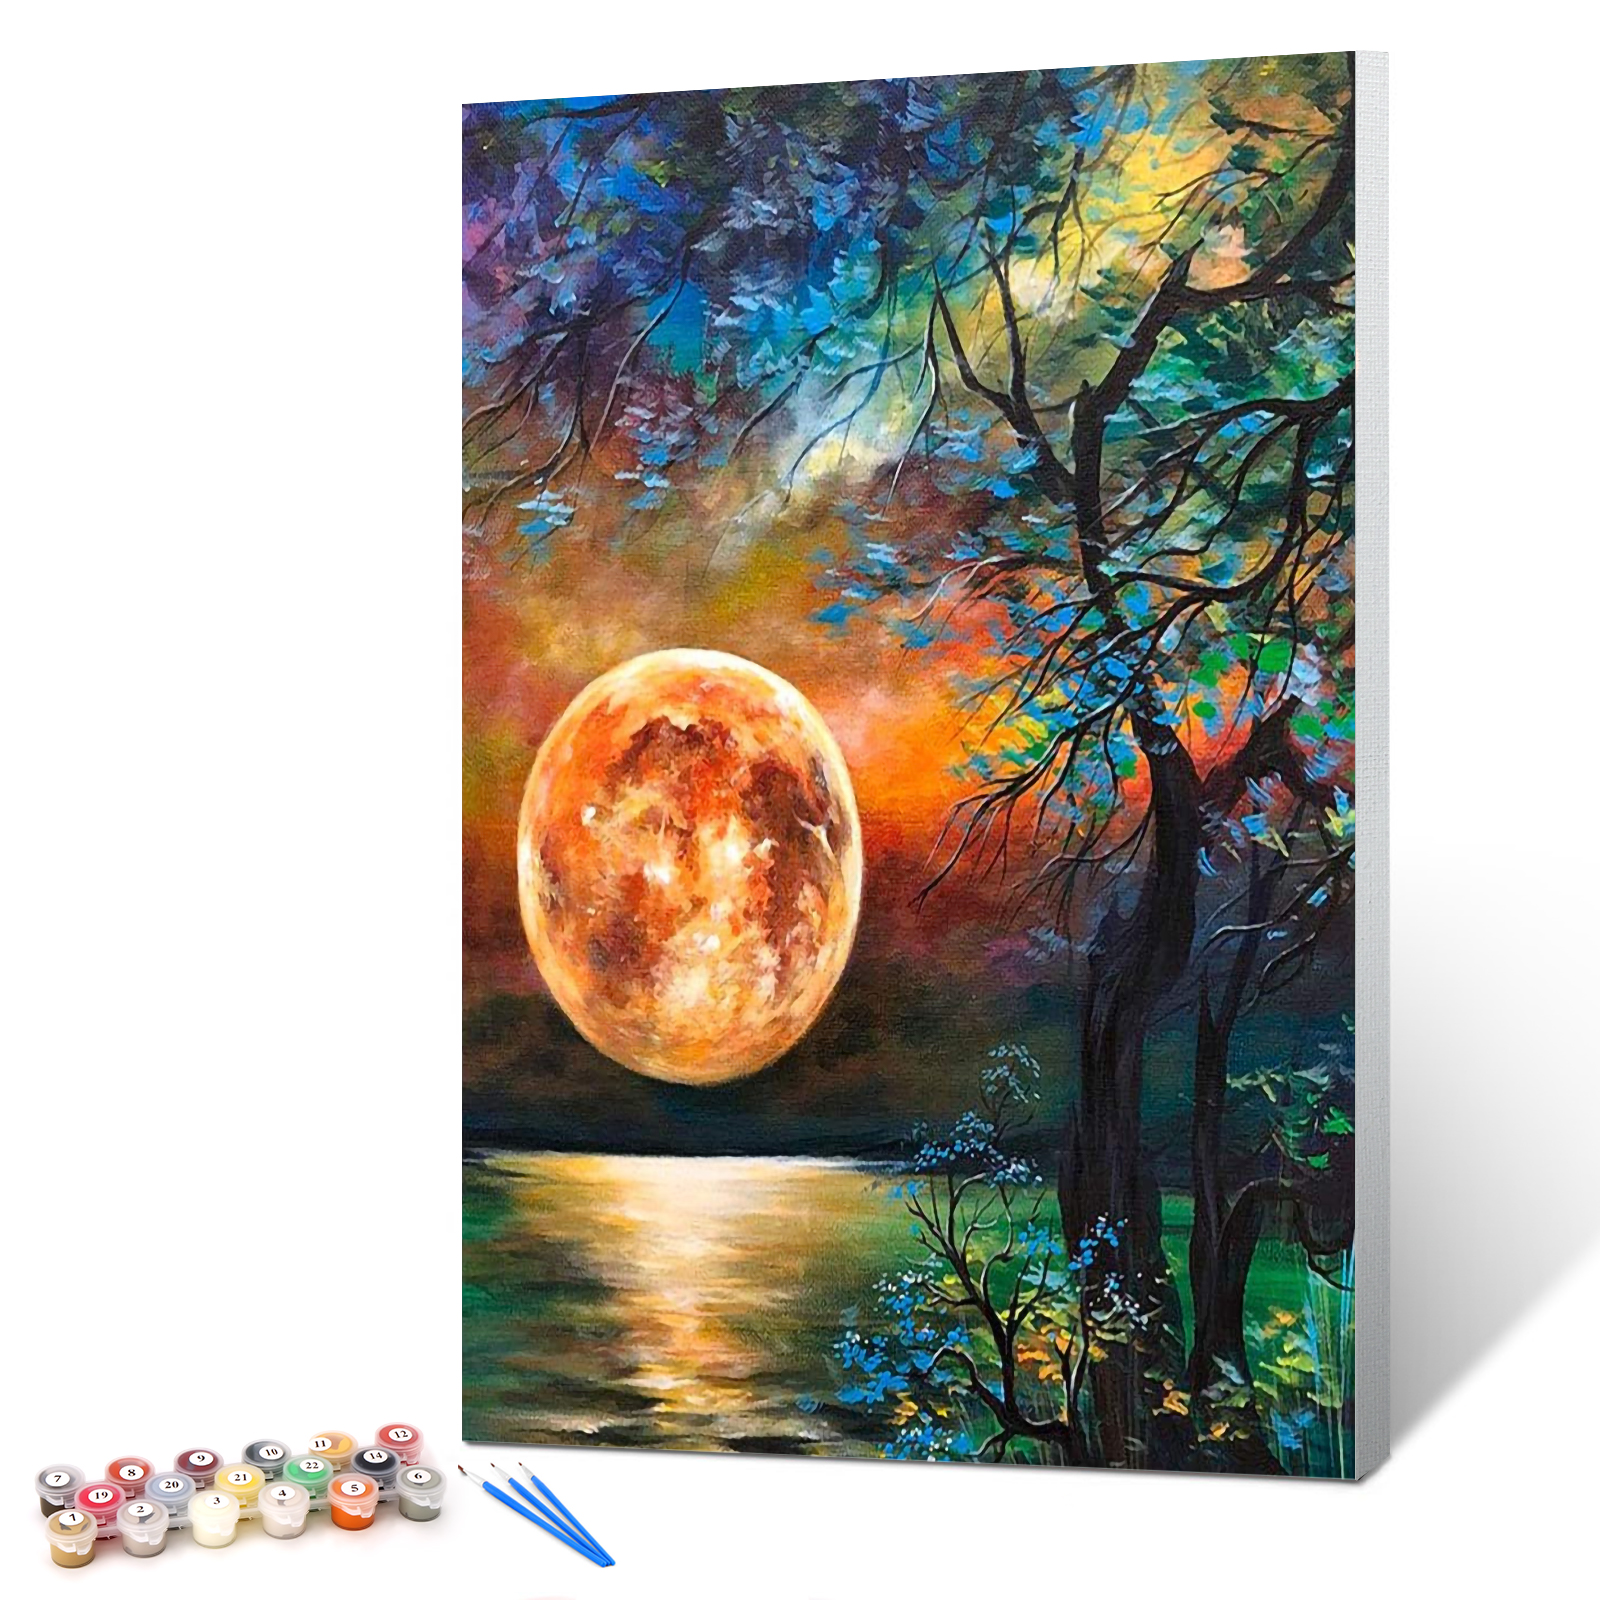 Ginkko Paint by Numbers for Adults Beginner & Kids Ages 8-12 with Wooden Frame Easy Acrylic on Canvas 9x12 inch with Paints and Brushes, Moon(Include Framed)